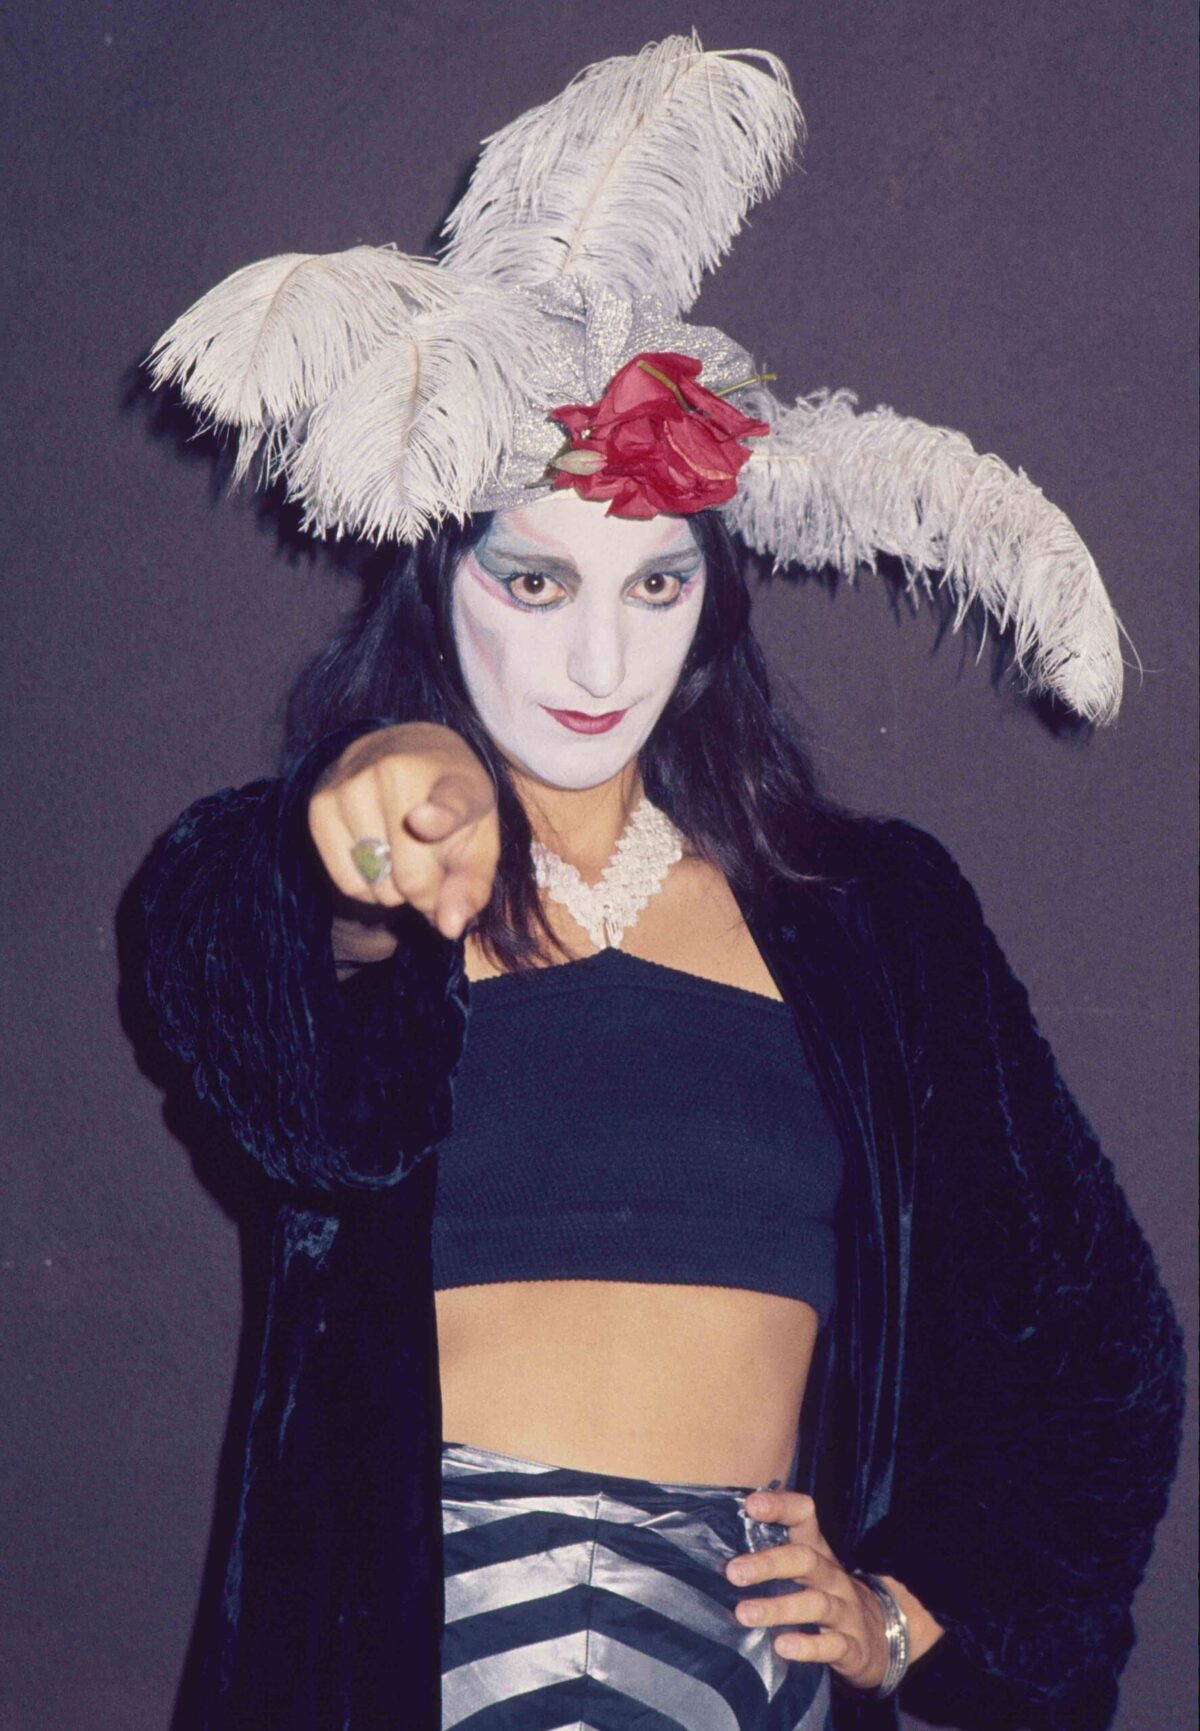 A person in white mime face paint, with three matching white feathers on her head, points at the camera.